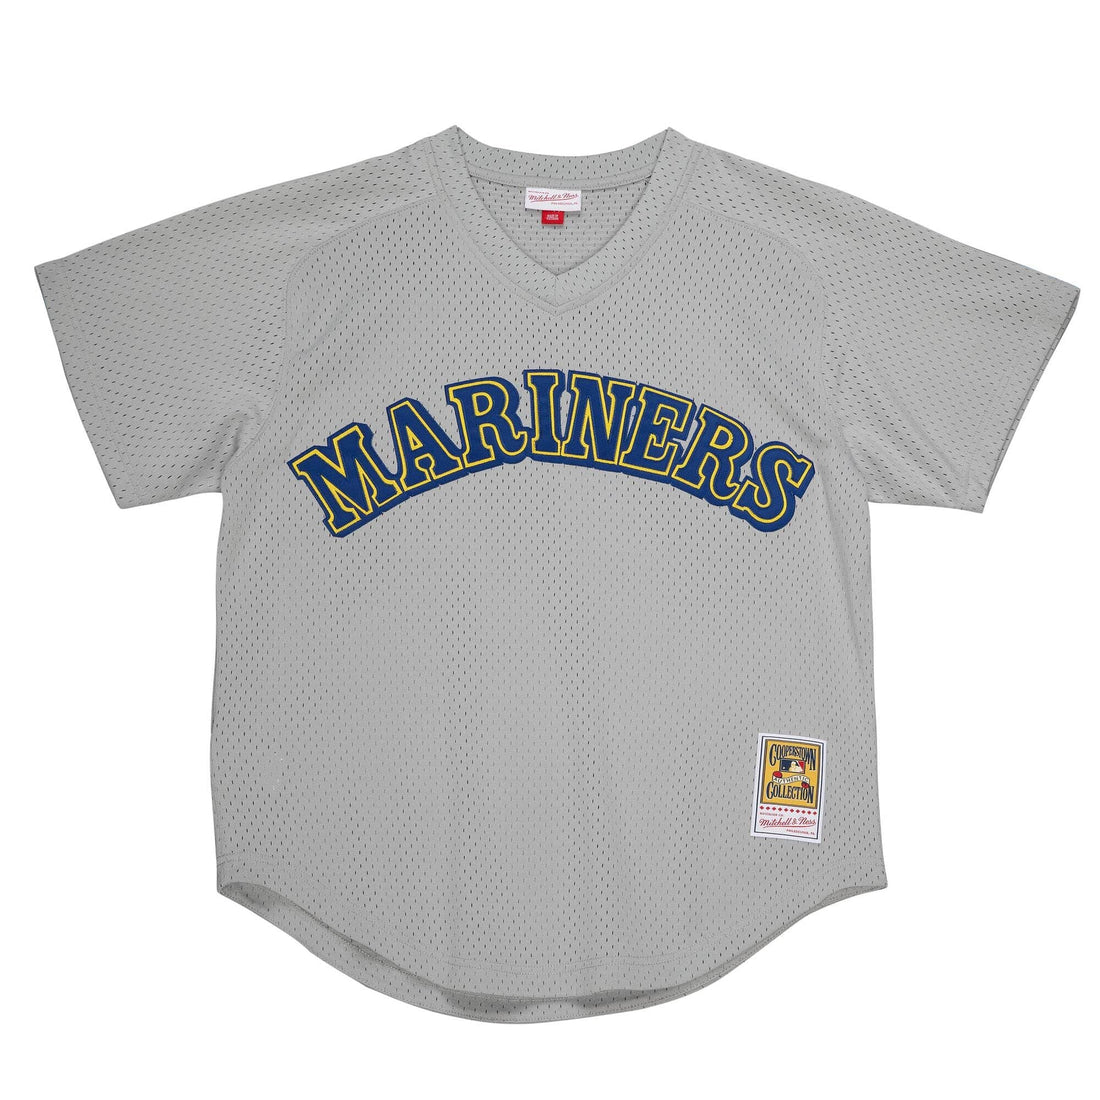 Men's Mitchell & Ness Ken Griffey Jr. Light Blue Seattle Mariners  Cooperstown Collection Authentic Jersey